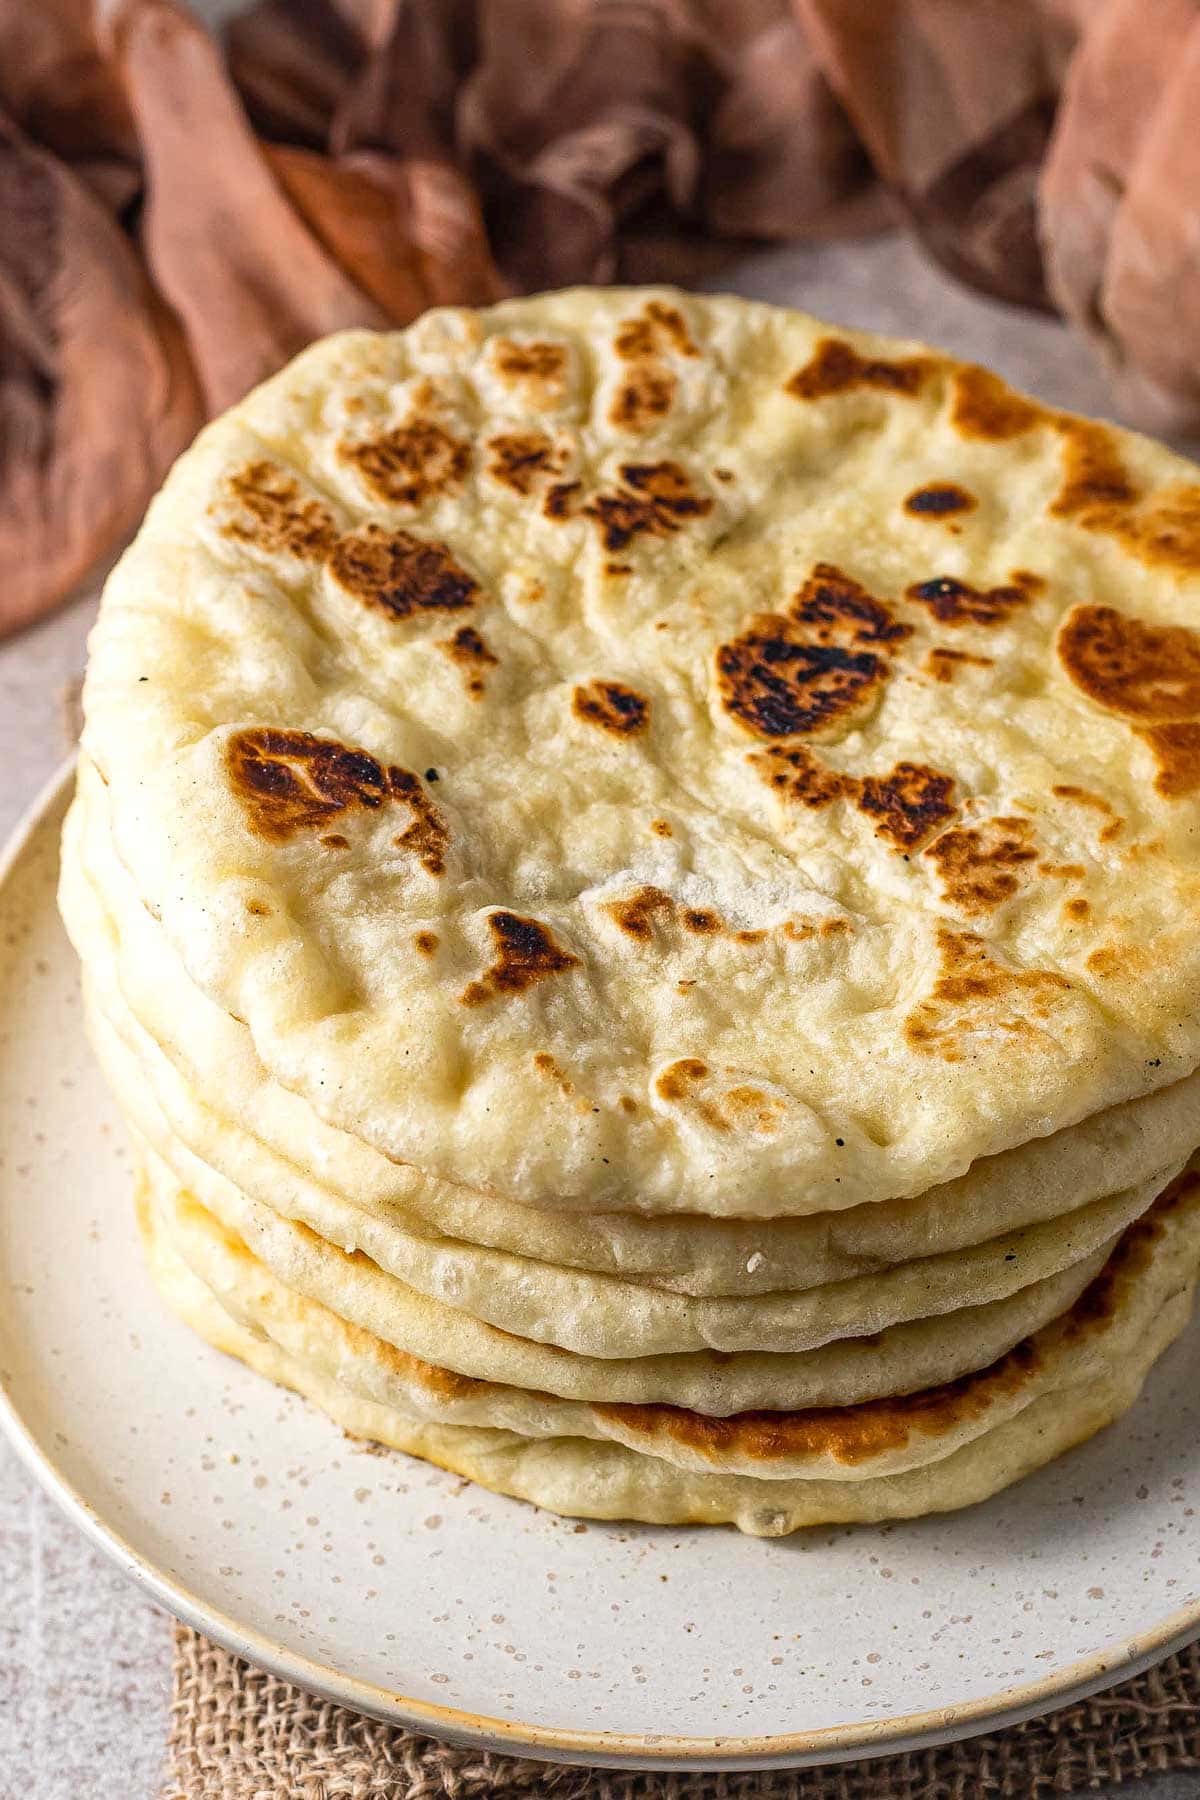 tall stack of pita bread on plate with orange cloth behind.